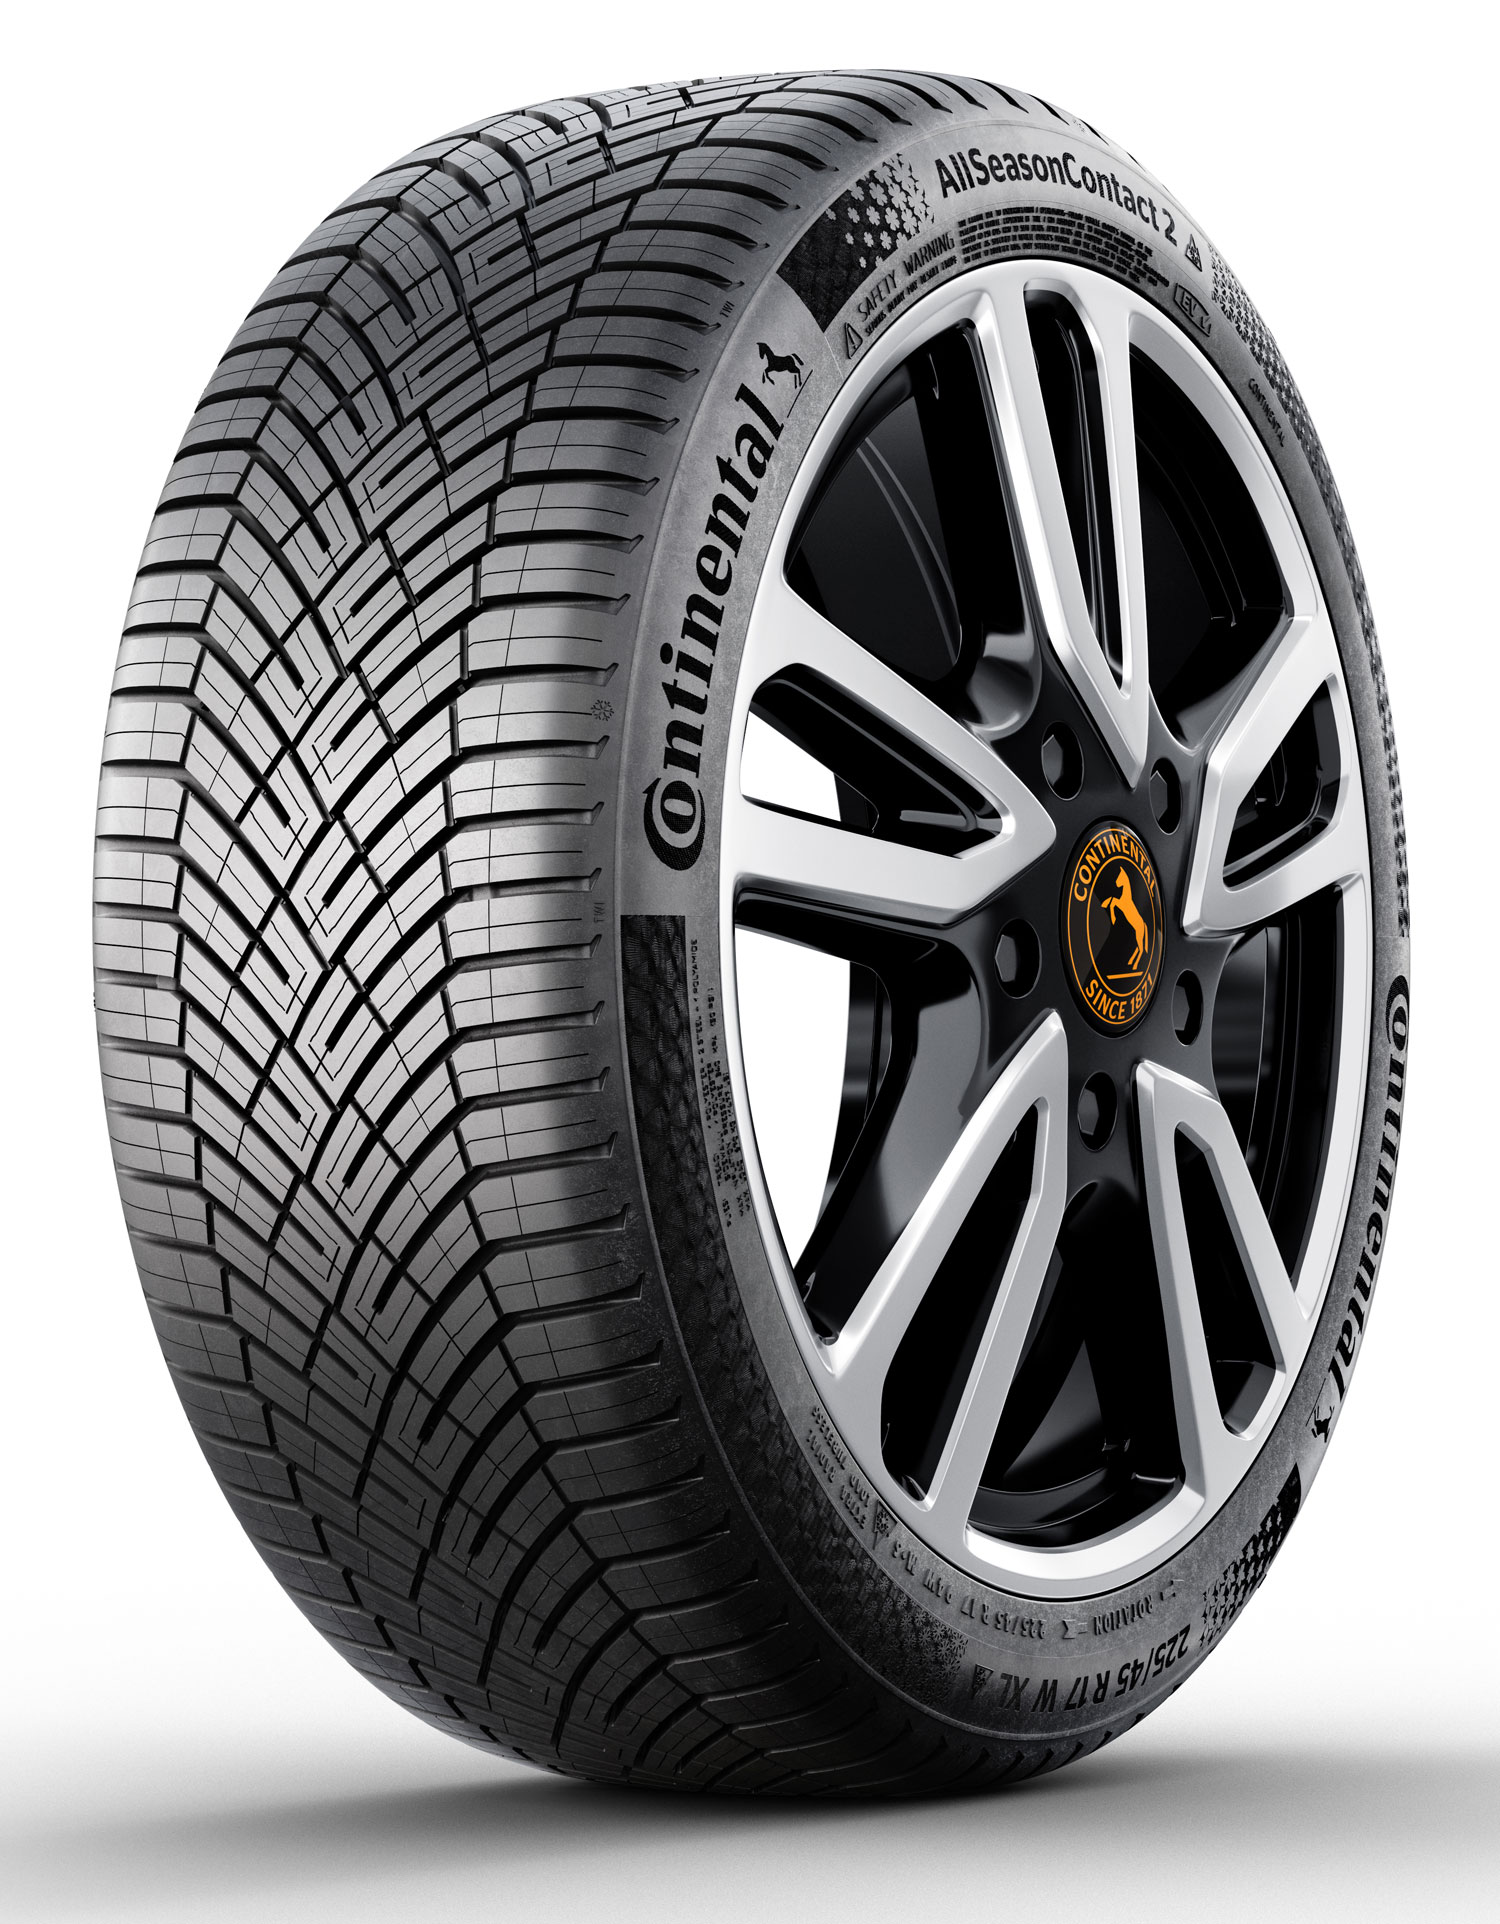 Gomme Nuove Continental 245/50 R18 100V ALLSEASONCONTACT 2 FR M+S pneumatici nuovi All Season